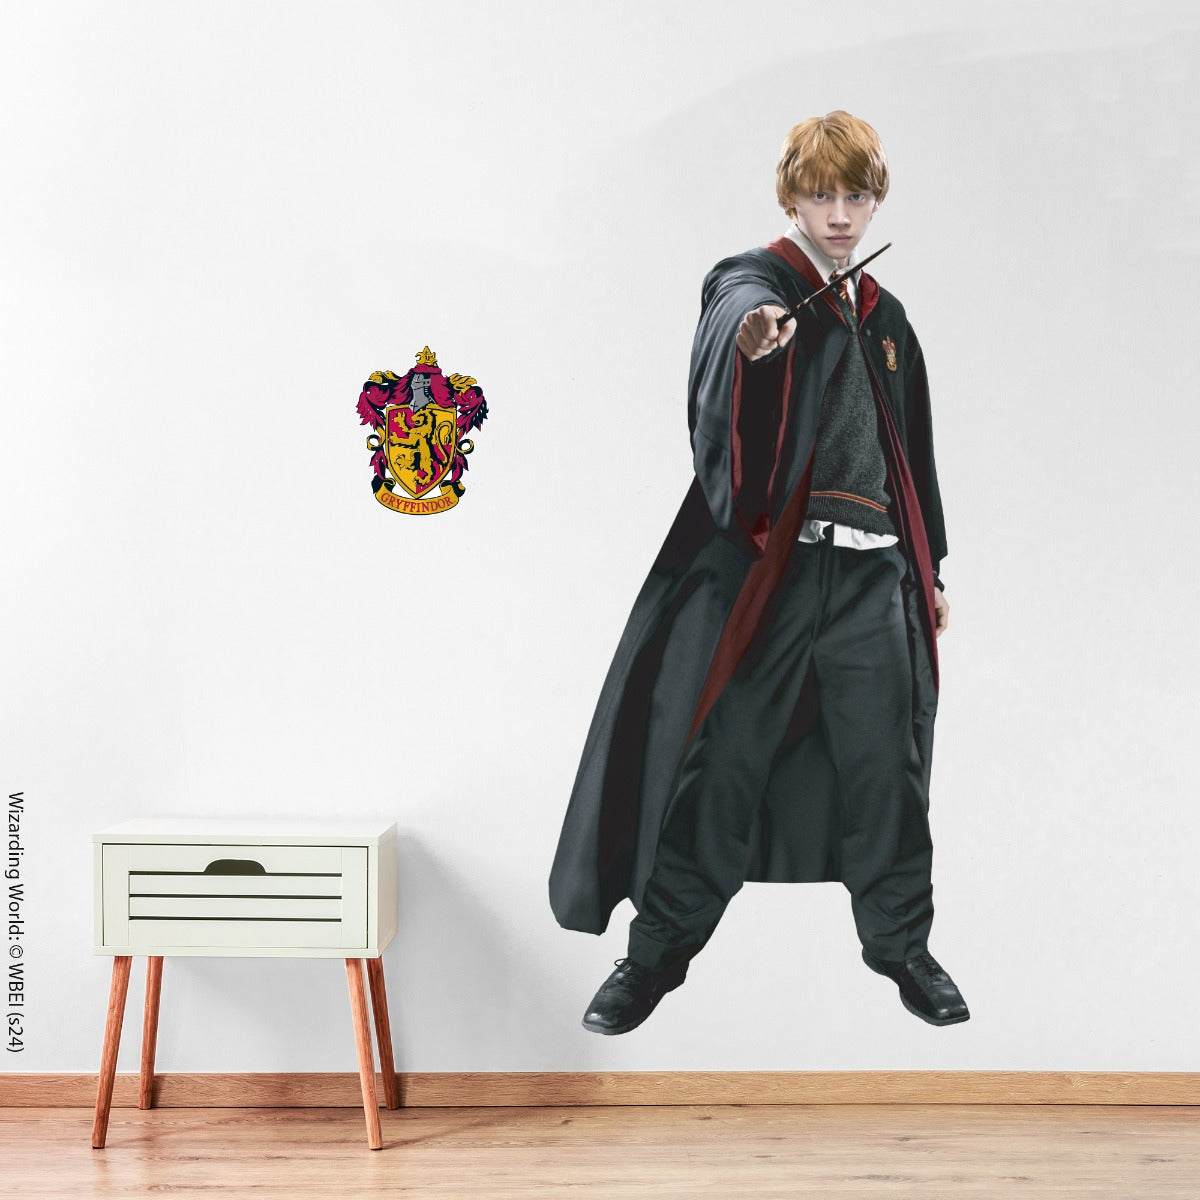 HARRY POTTER Wall Sticker - Ron Weasley 5th Year Cut Out Wall Decal Wizarding World Art